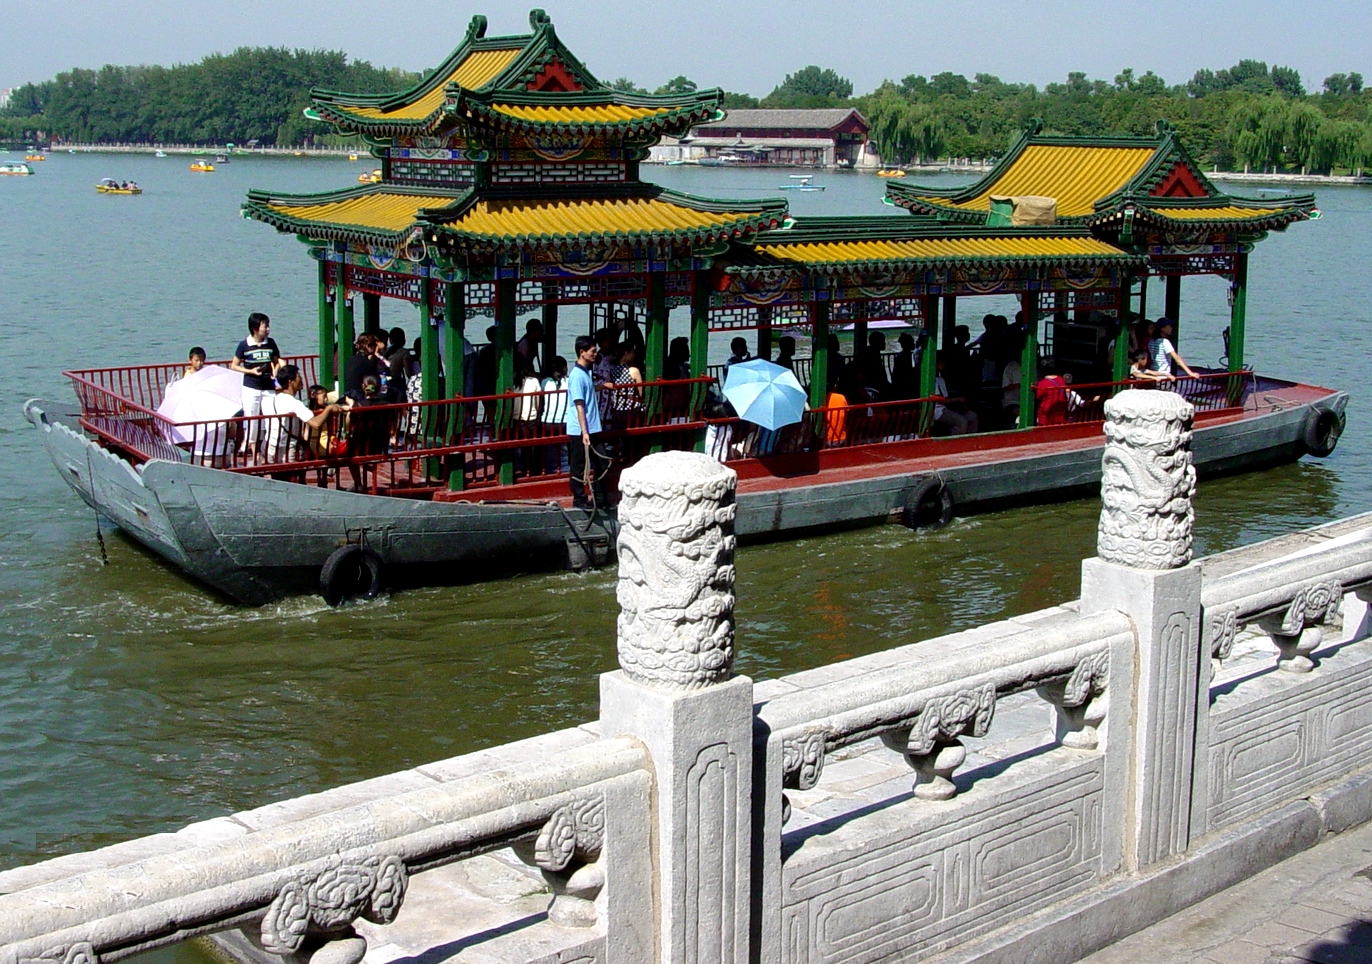 Boat for visitors on city lake